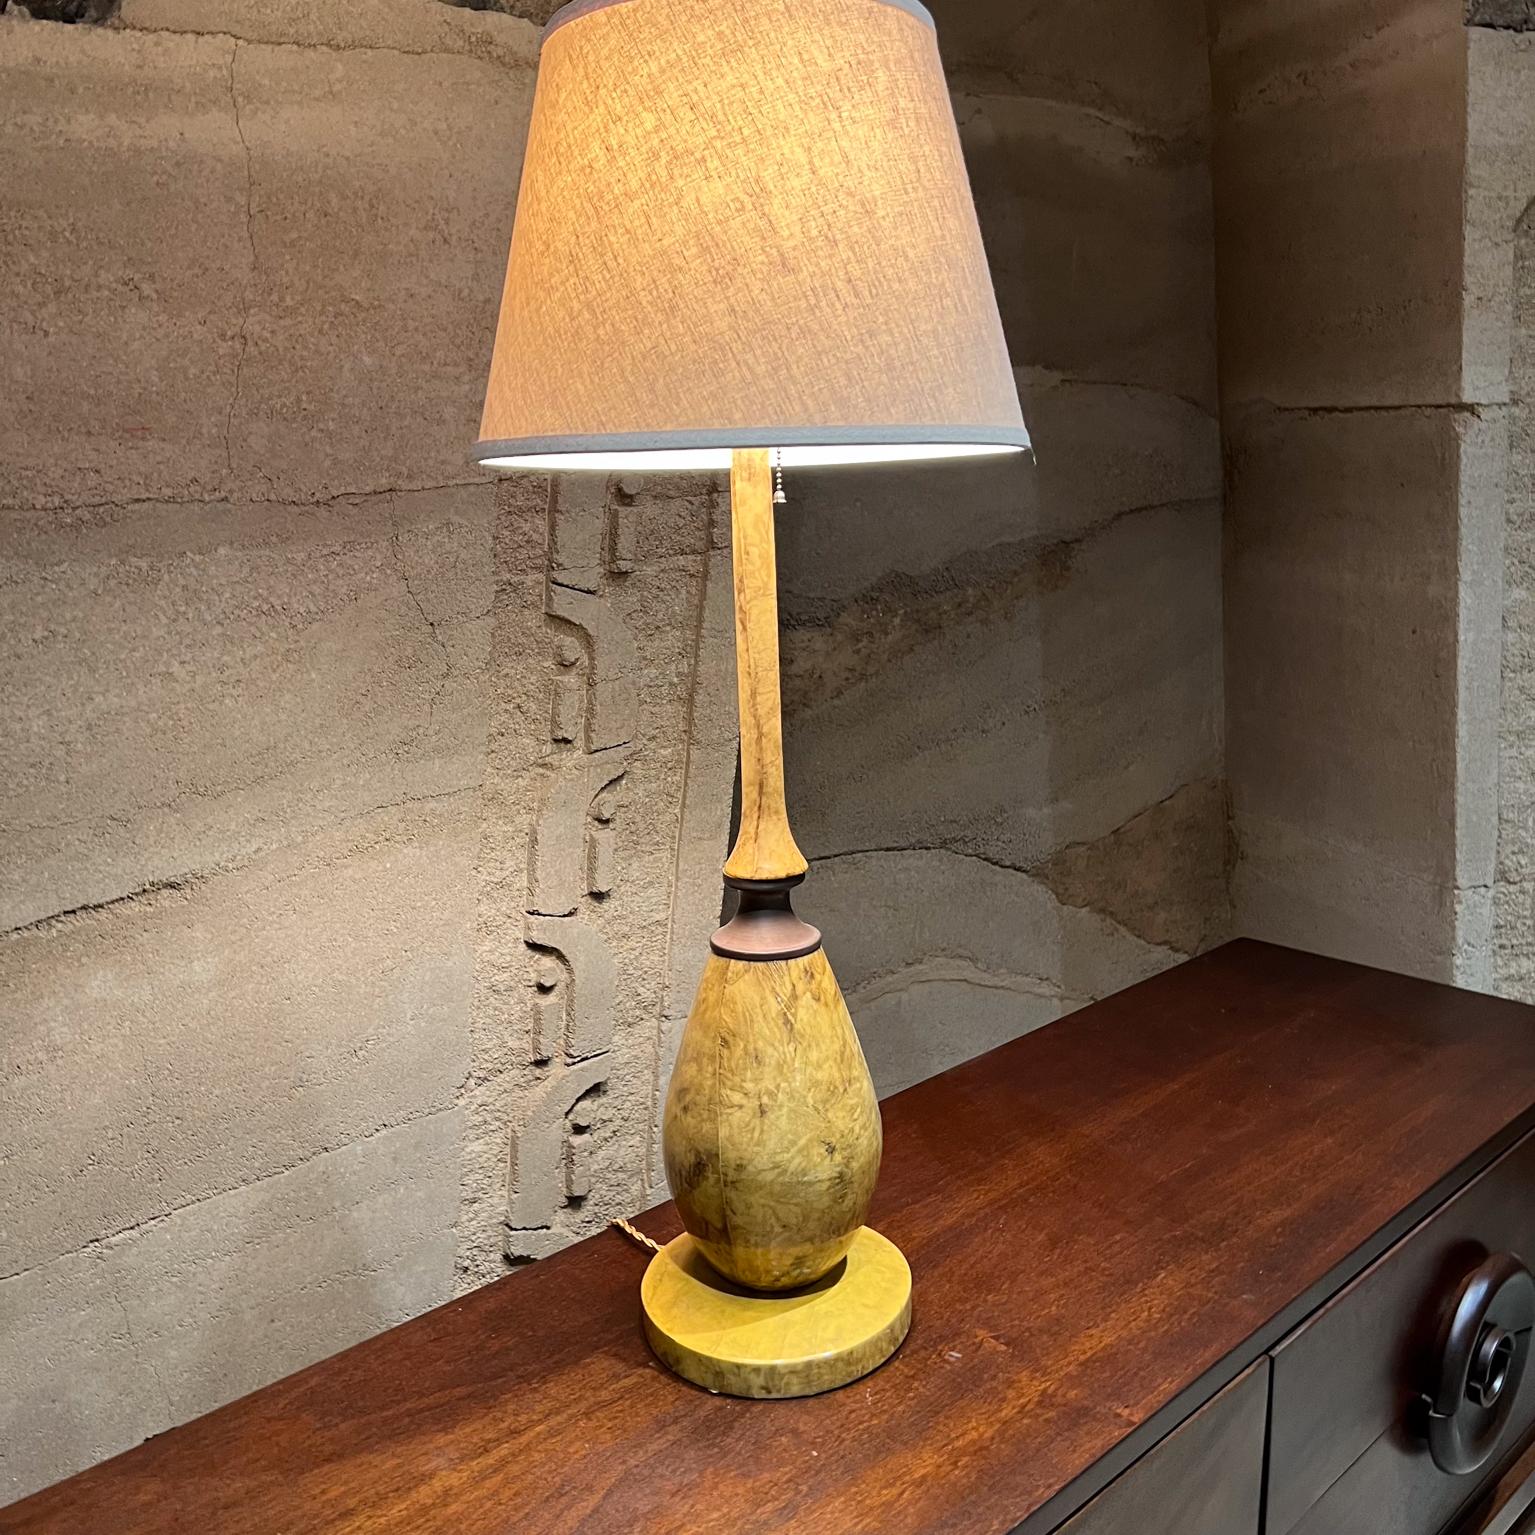 
1950s Tall Goatskin Table Lamp Italy
Attributed to Aldo Tura
Unmarked
30.25 h x 8.5 diameter
Preowned unrestored vintage condition
No lamp shade is included.
Refer to images for condition.